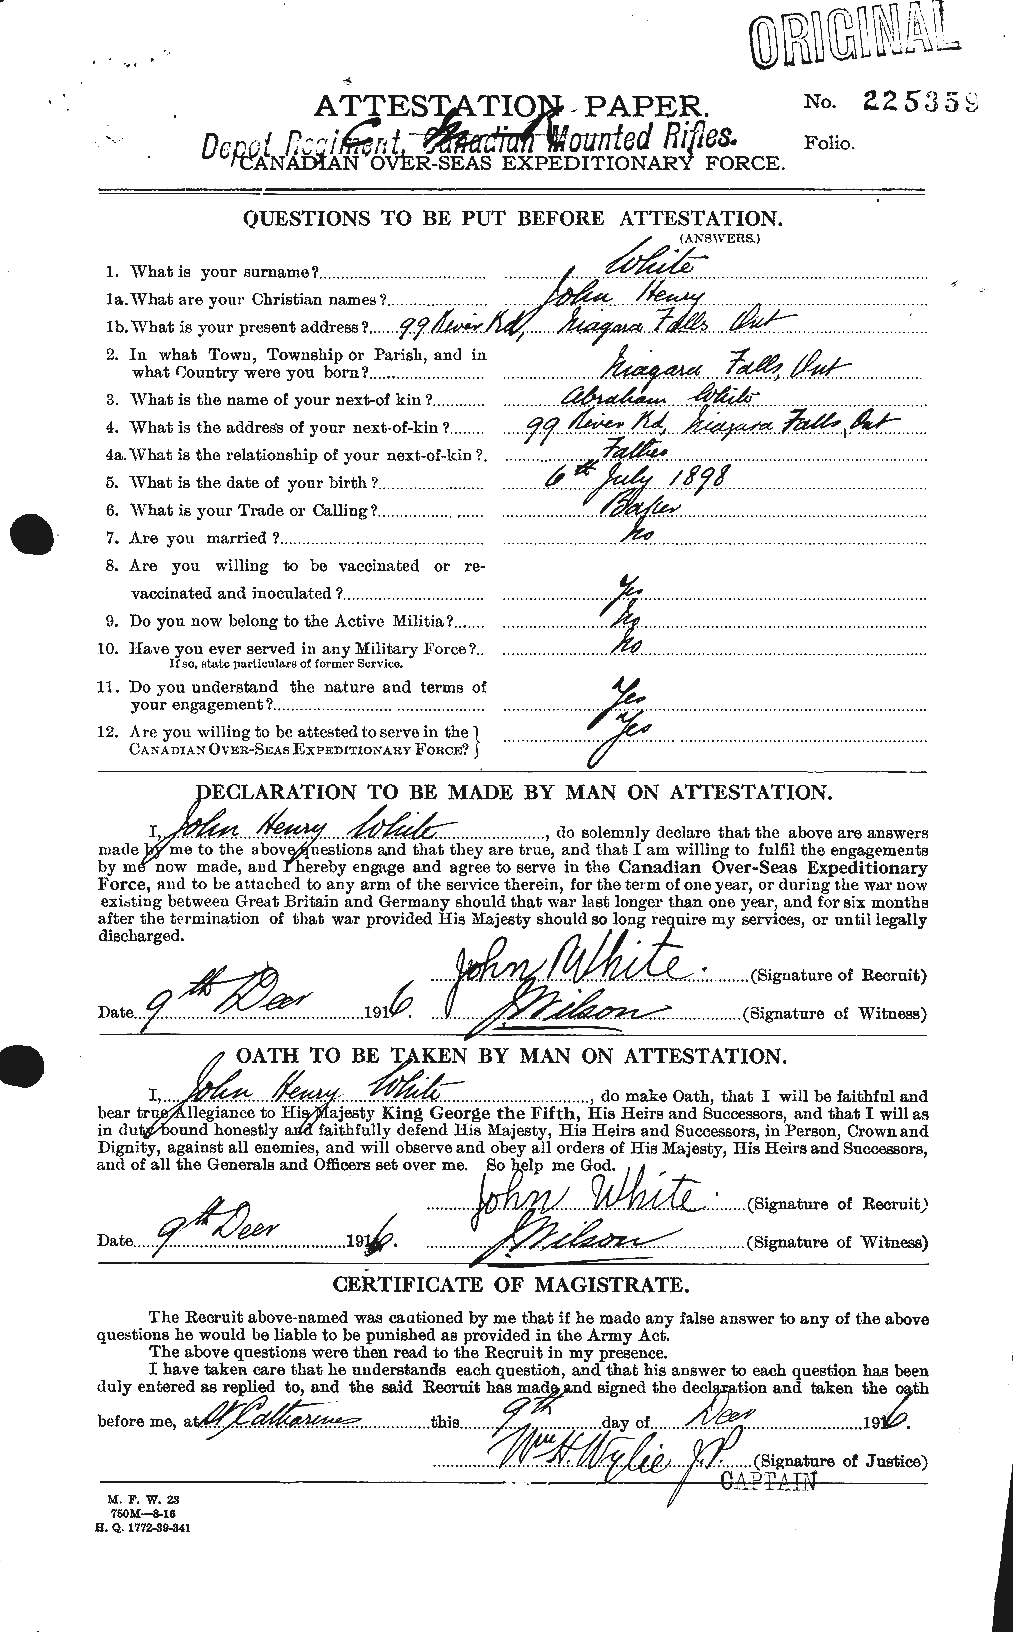 Personnel Records of the First World War - CEF 671568a